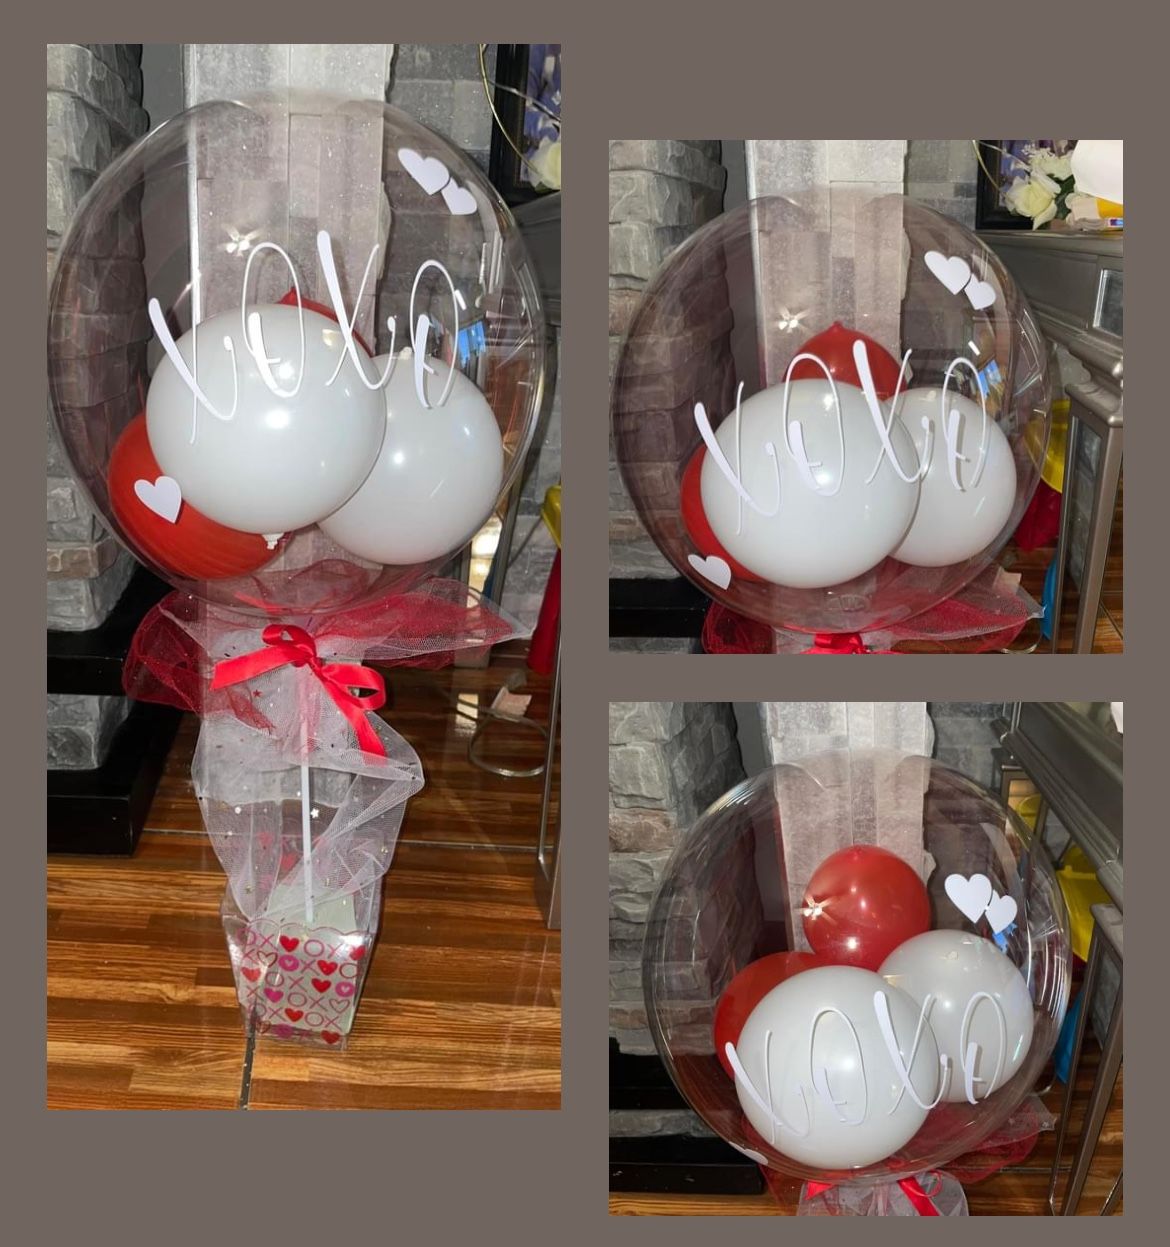 Bubble Balloons For Any Occasion